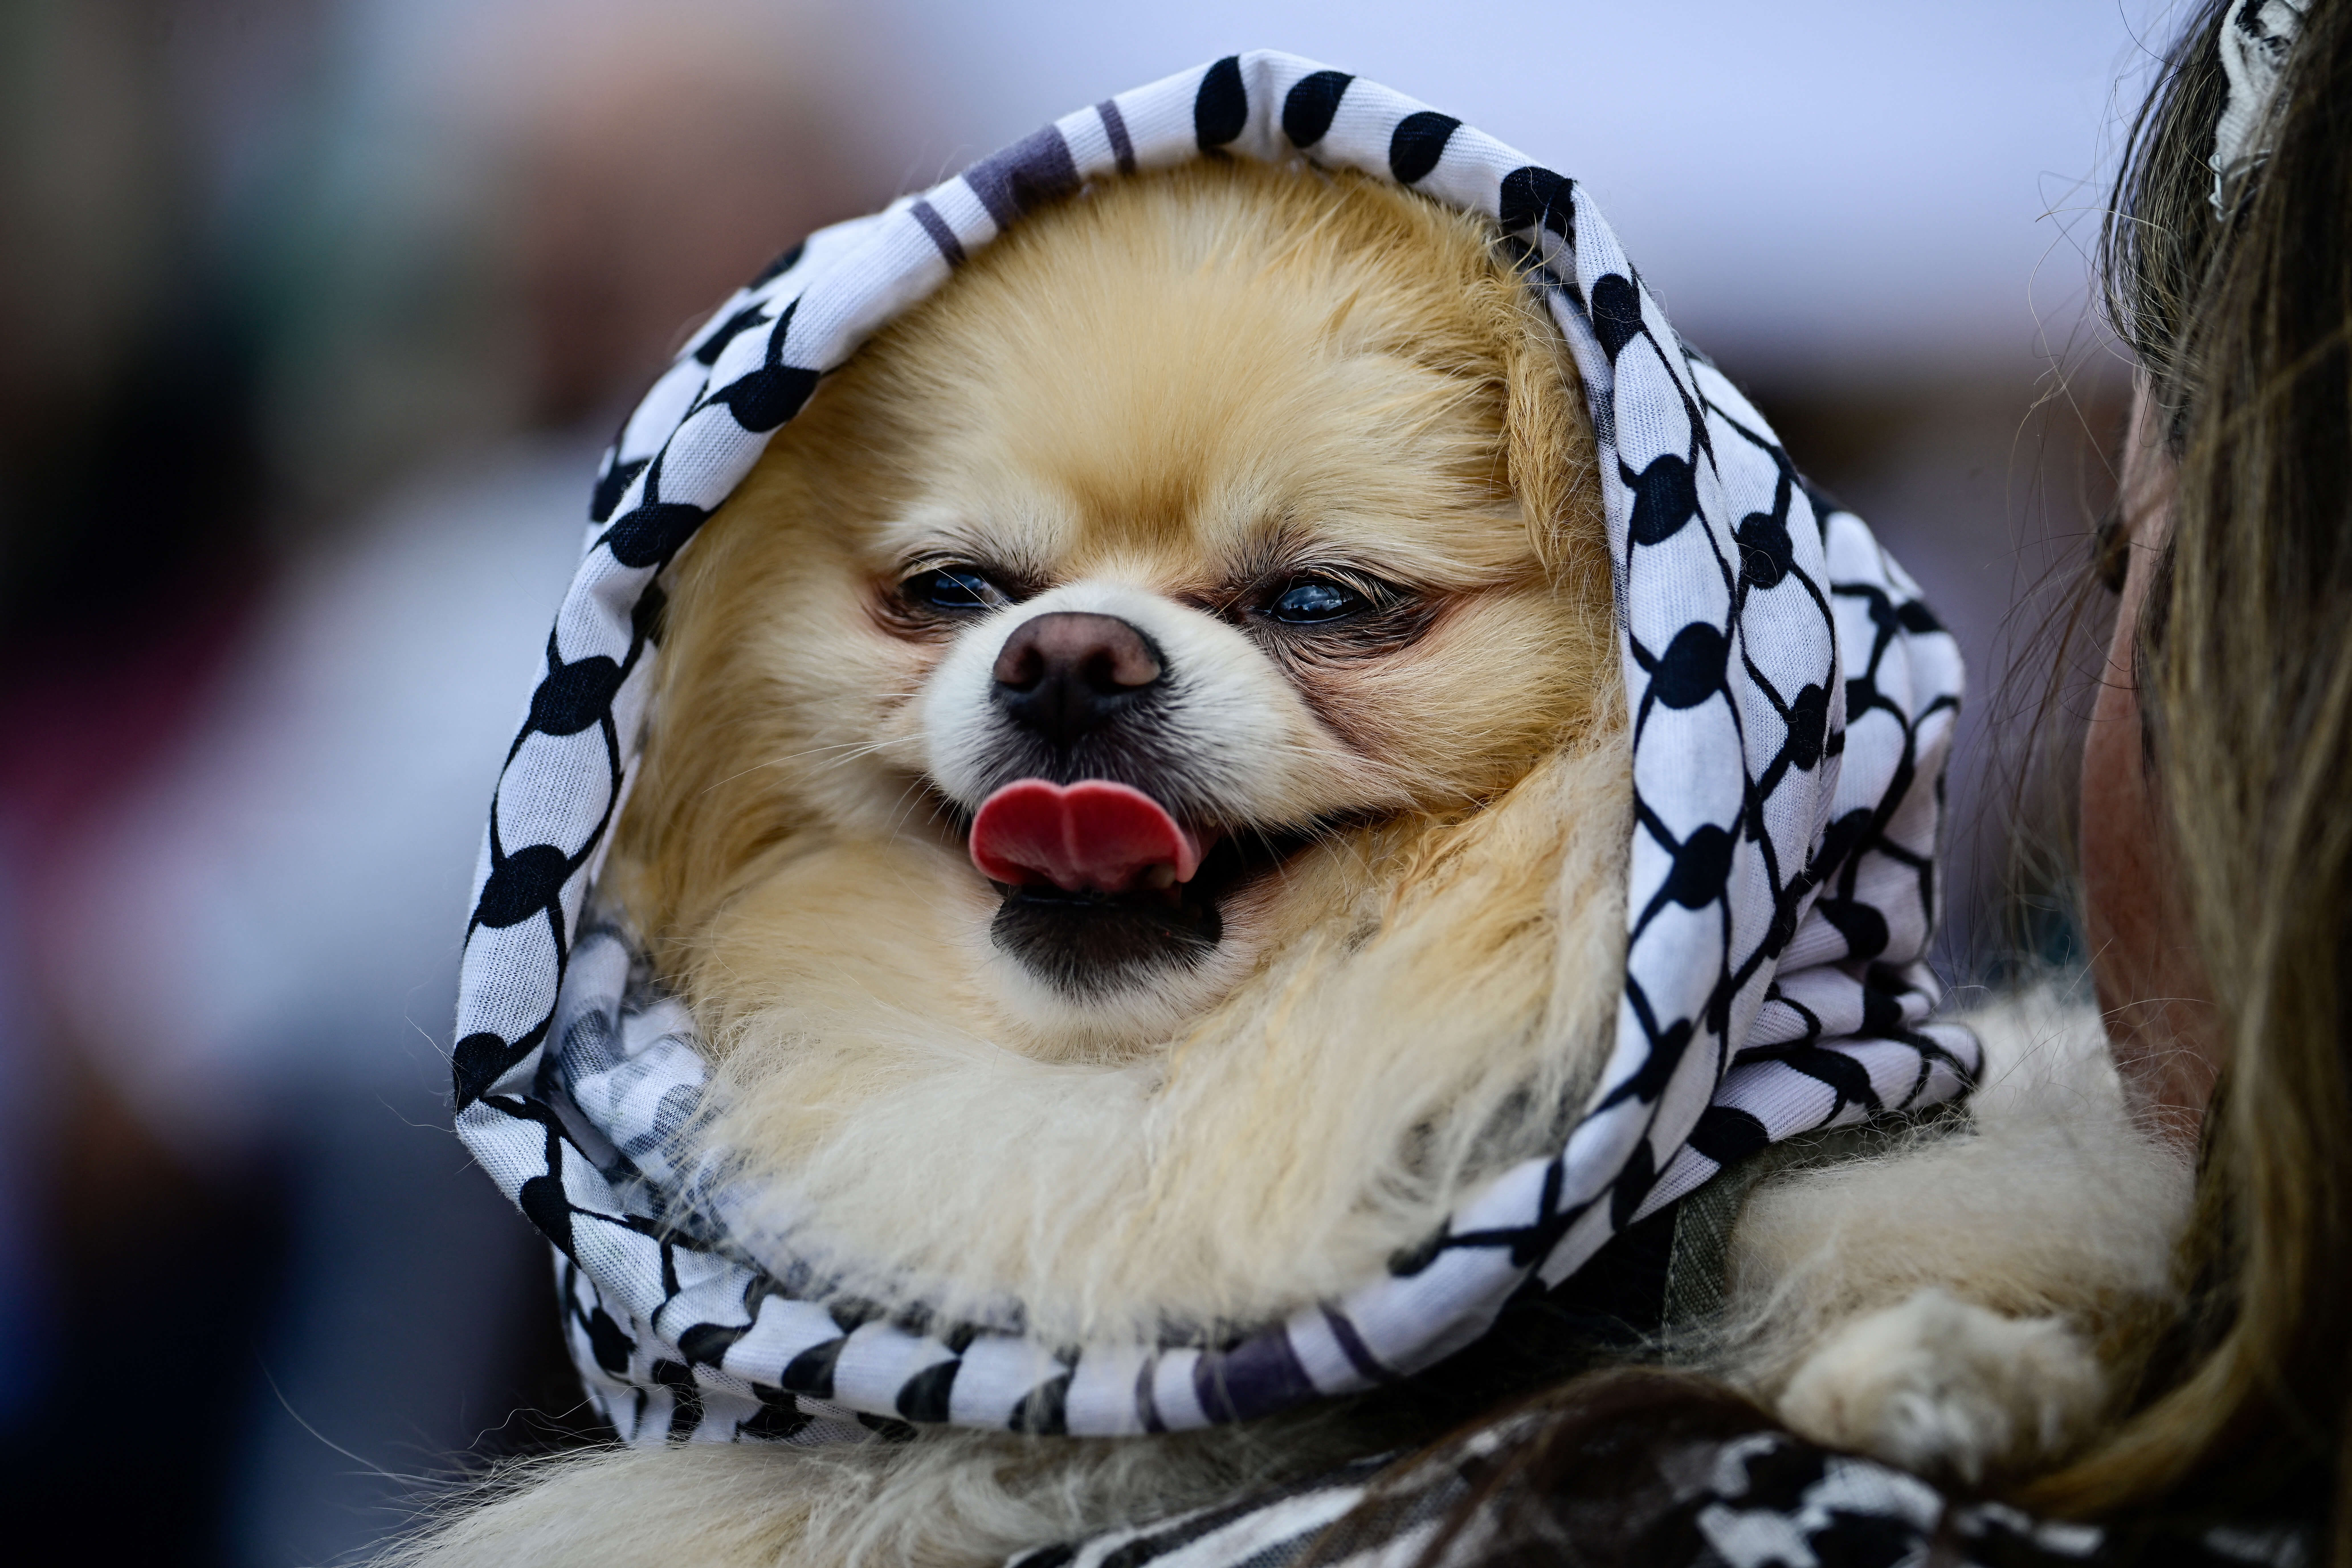 Keffiyeh-print dog accessories are also available.